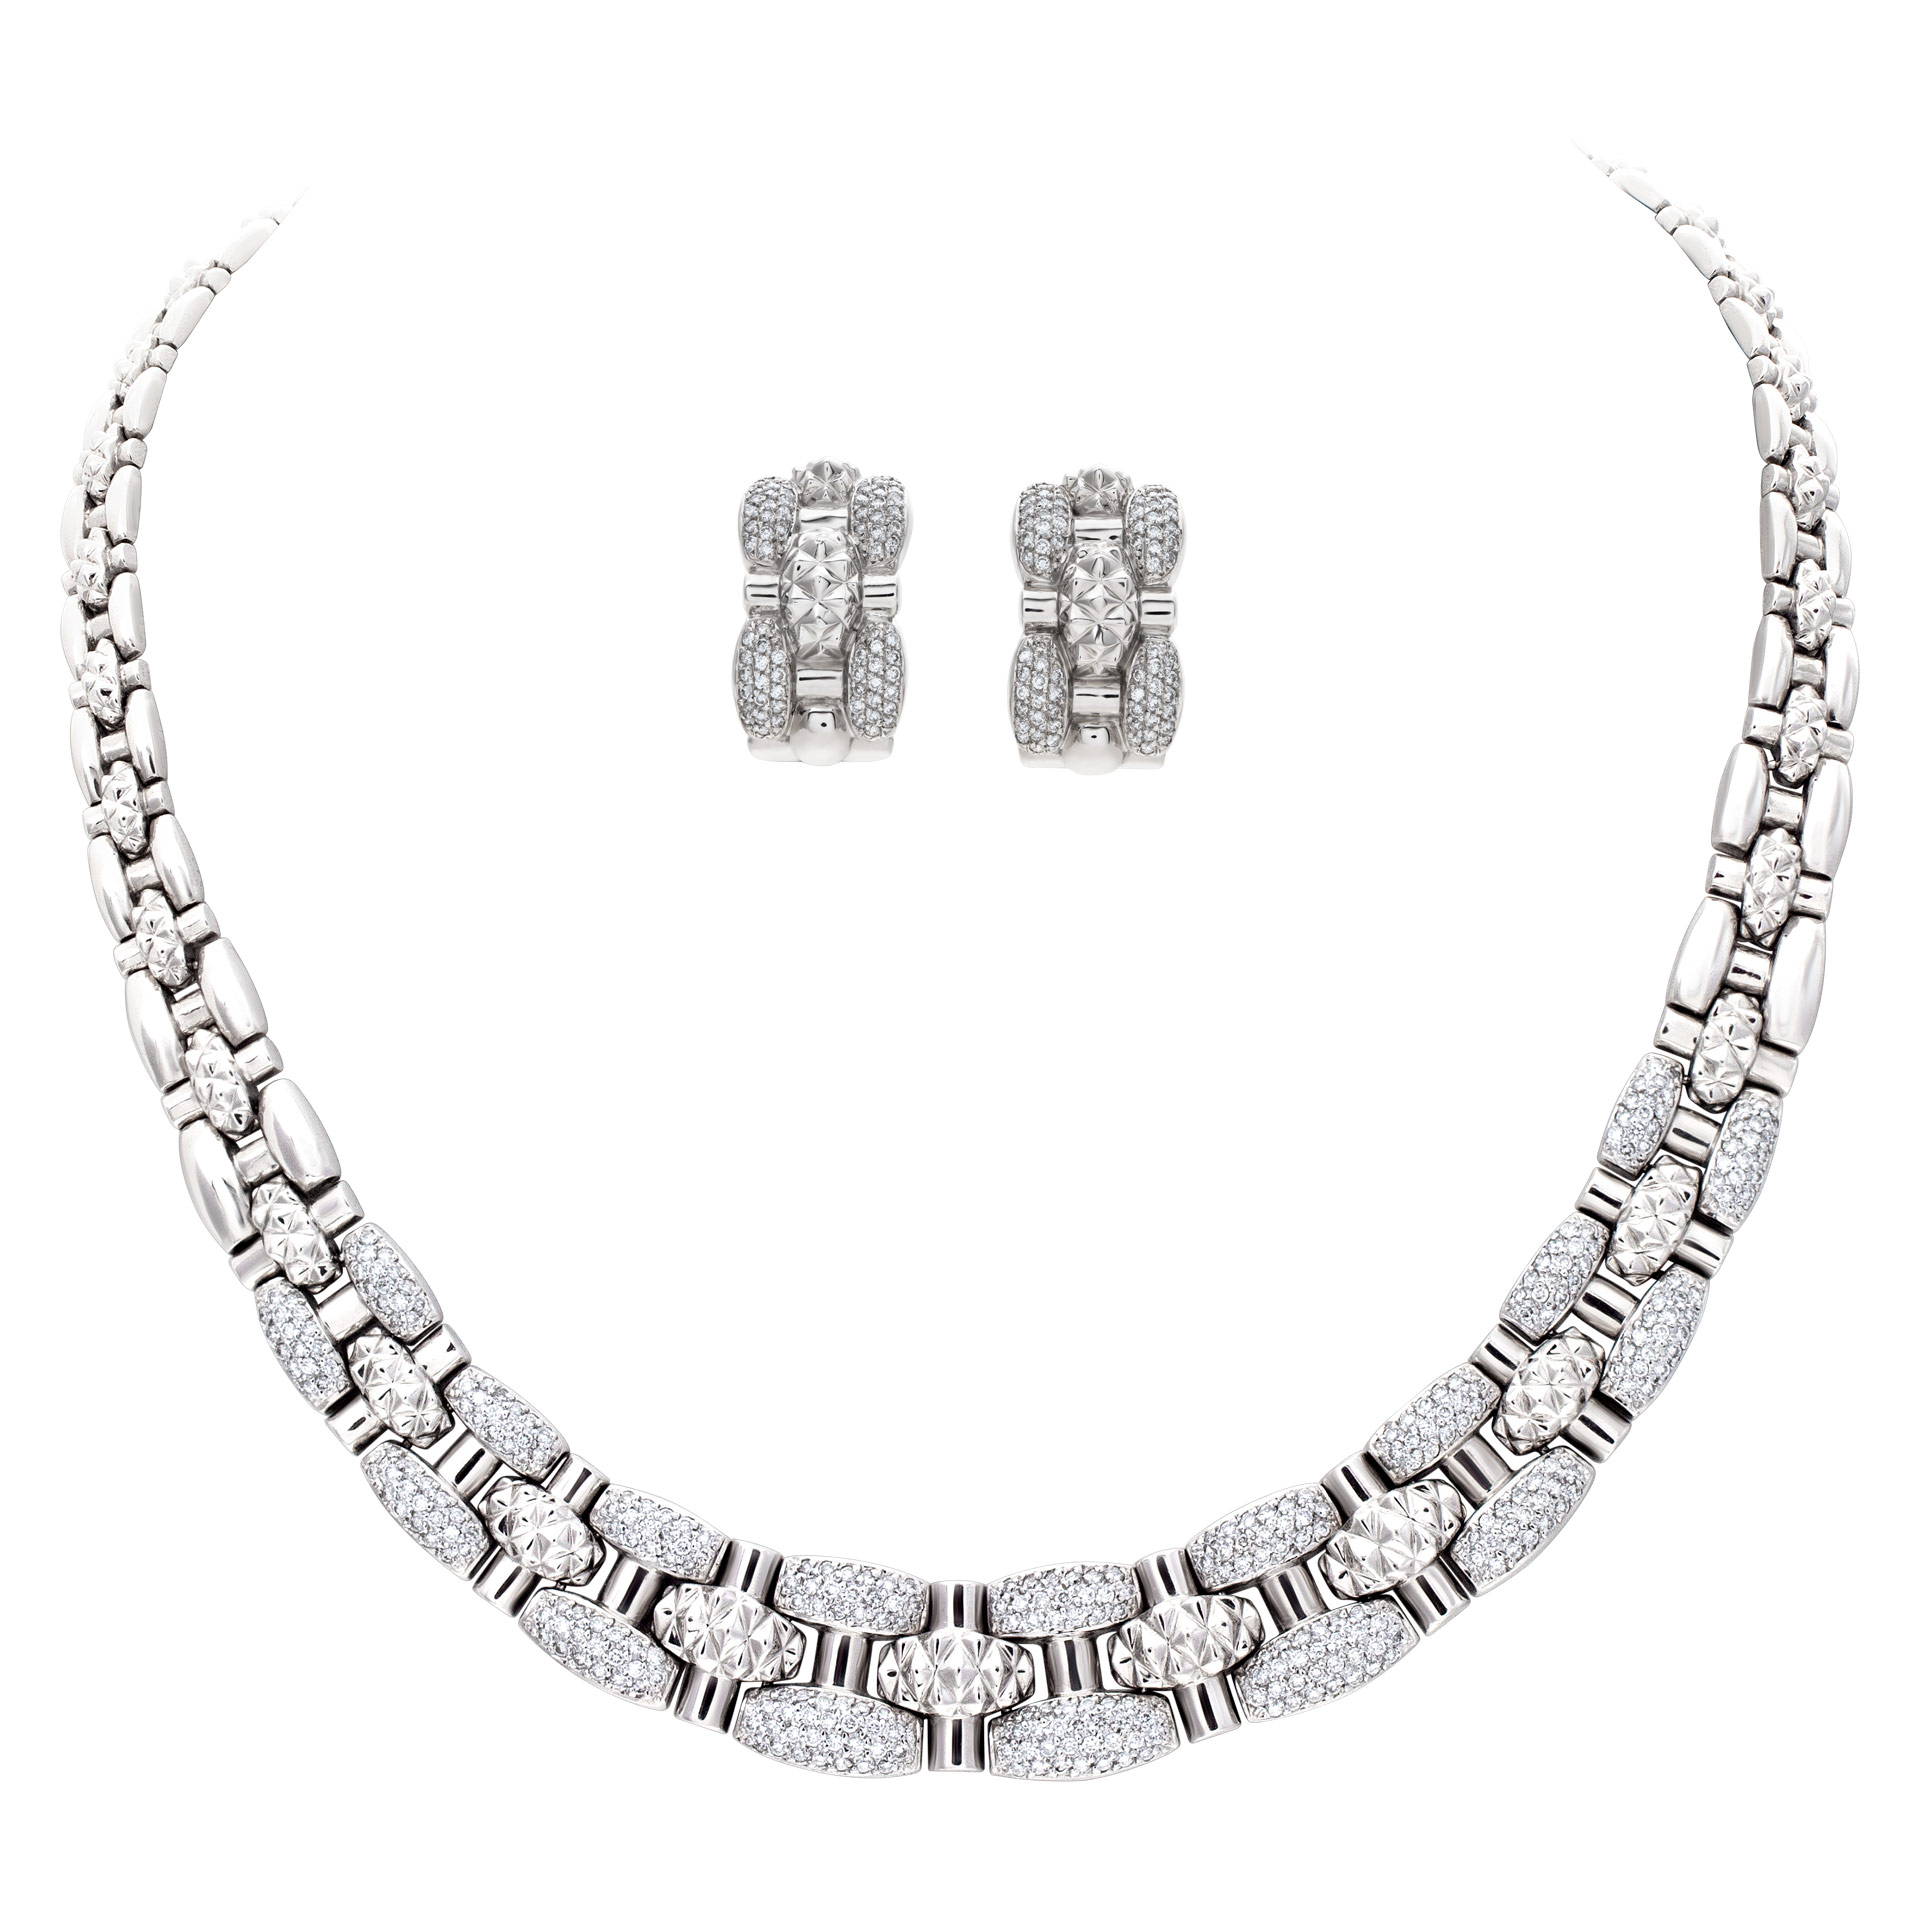 Pave diamond link necklace & earring set in 14k white gold. 3.50 carats